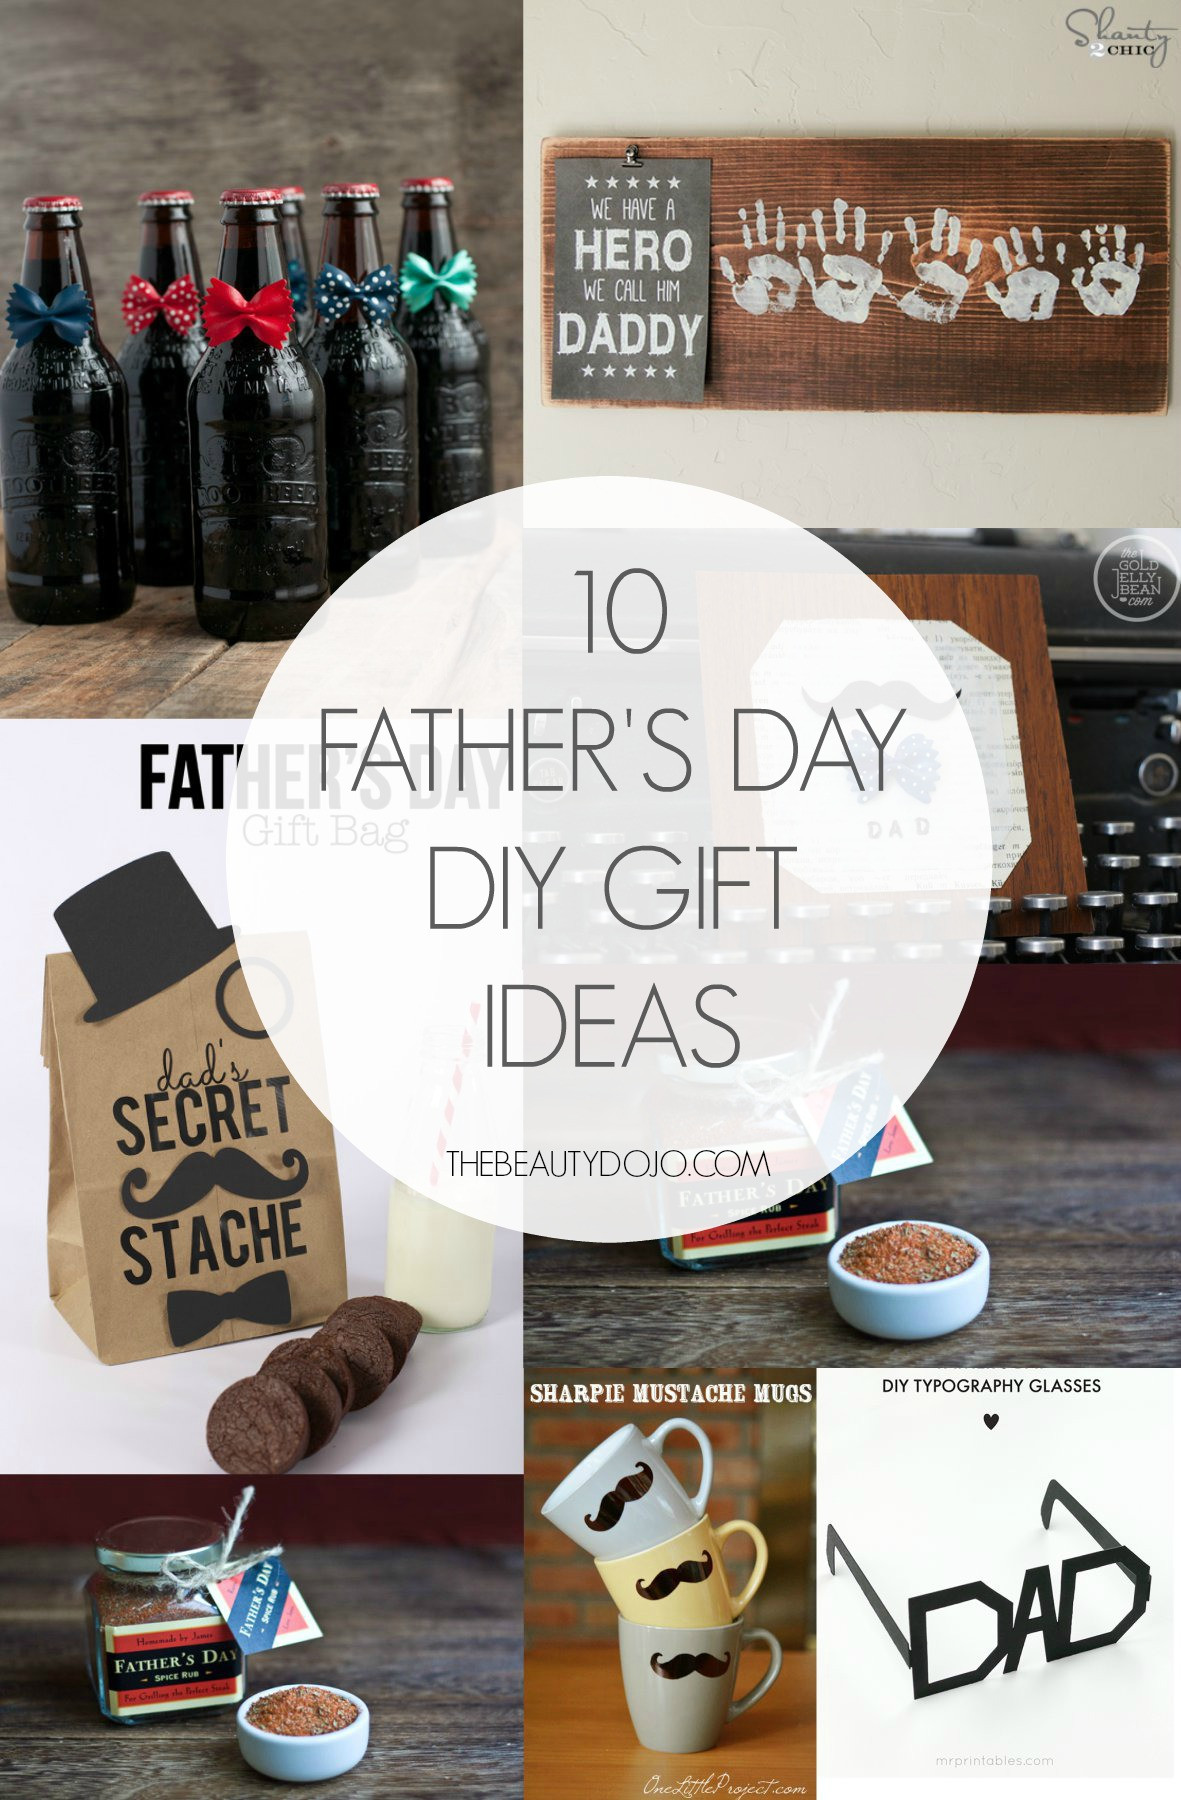 DIY Gifts For Fathers Day
 10 Father s Day DIY Gift Ideas The Beautydojo